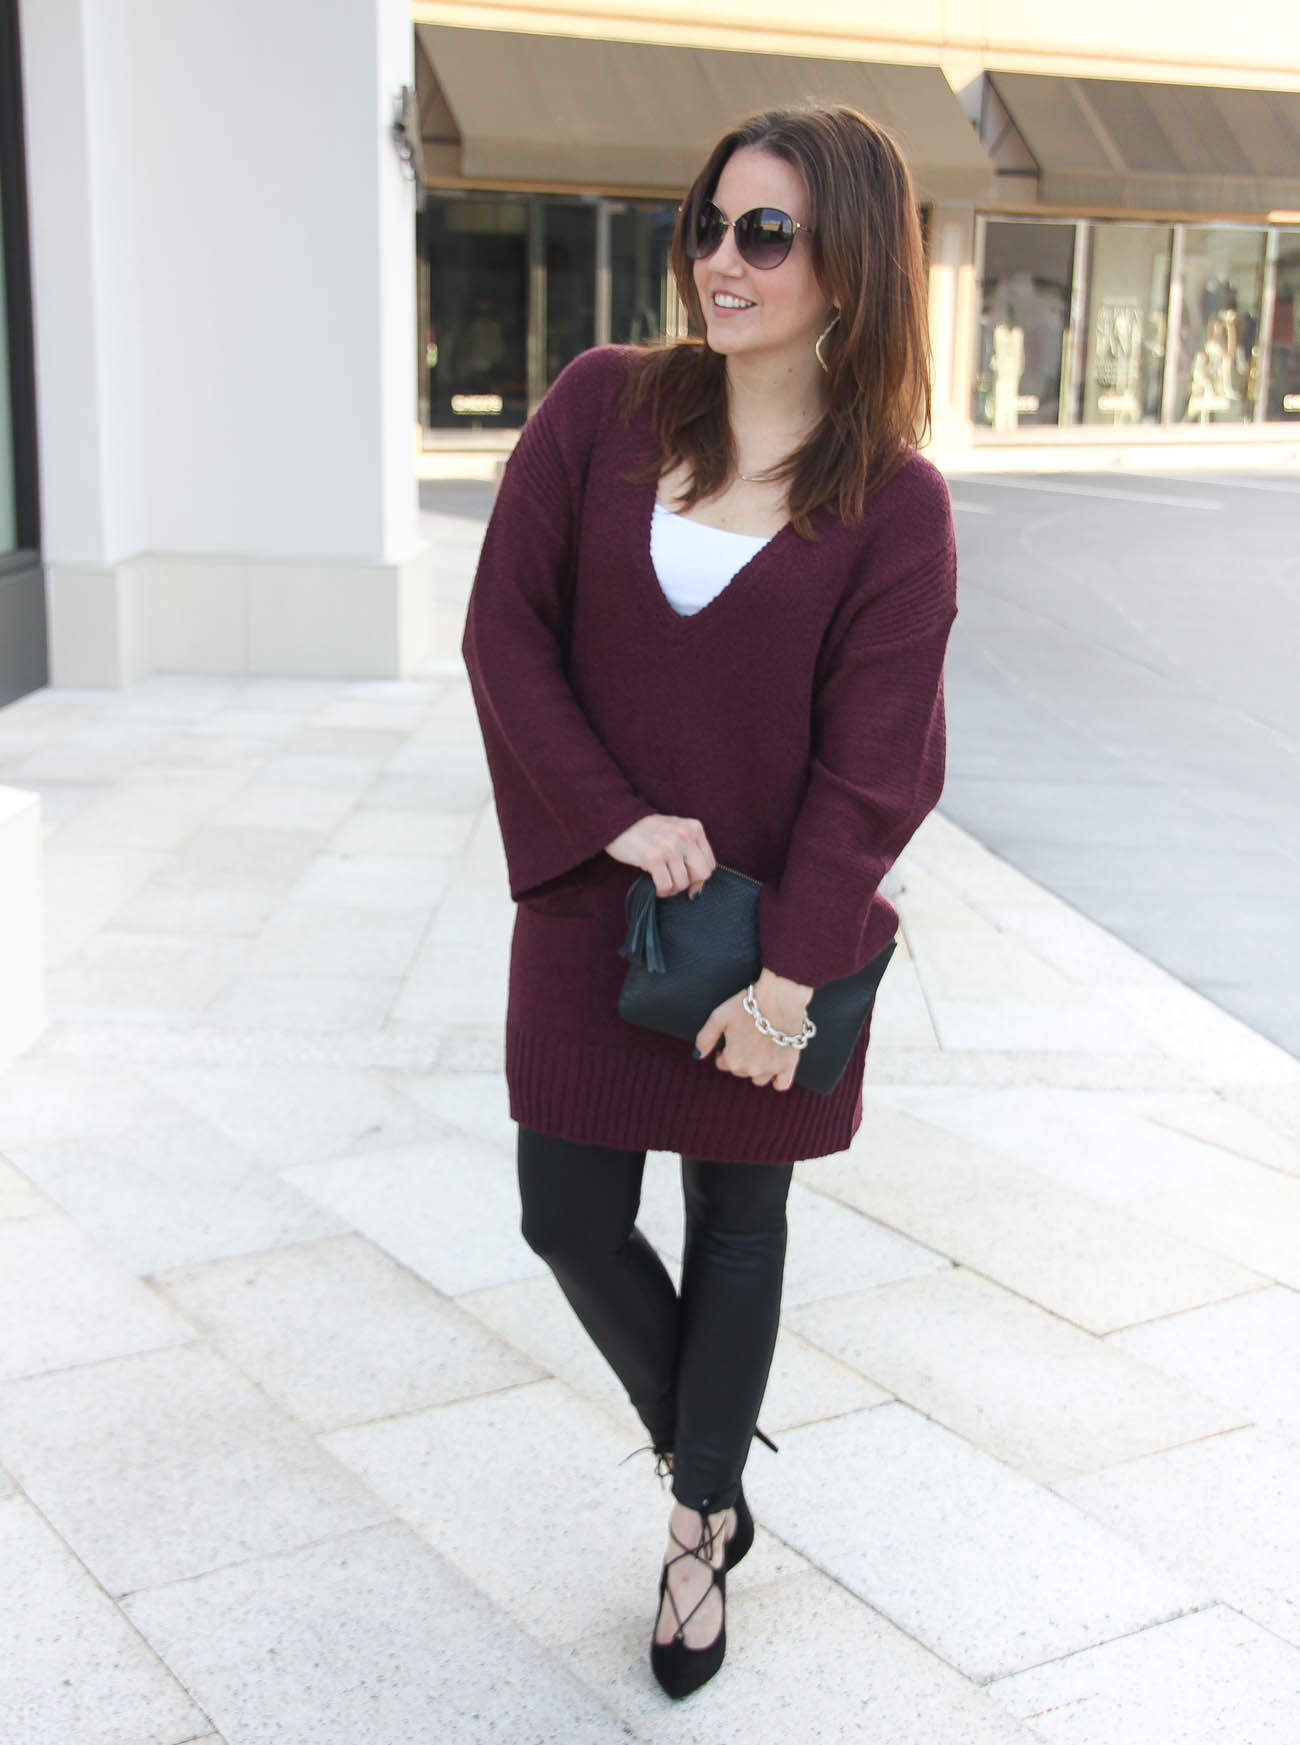 http://ladyinviolet.com/wp-content/uploads/2016/11/a-winter-outfit-tunic-sweater-leather-leggings.jpg